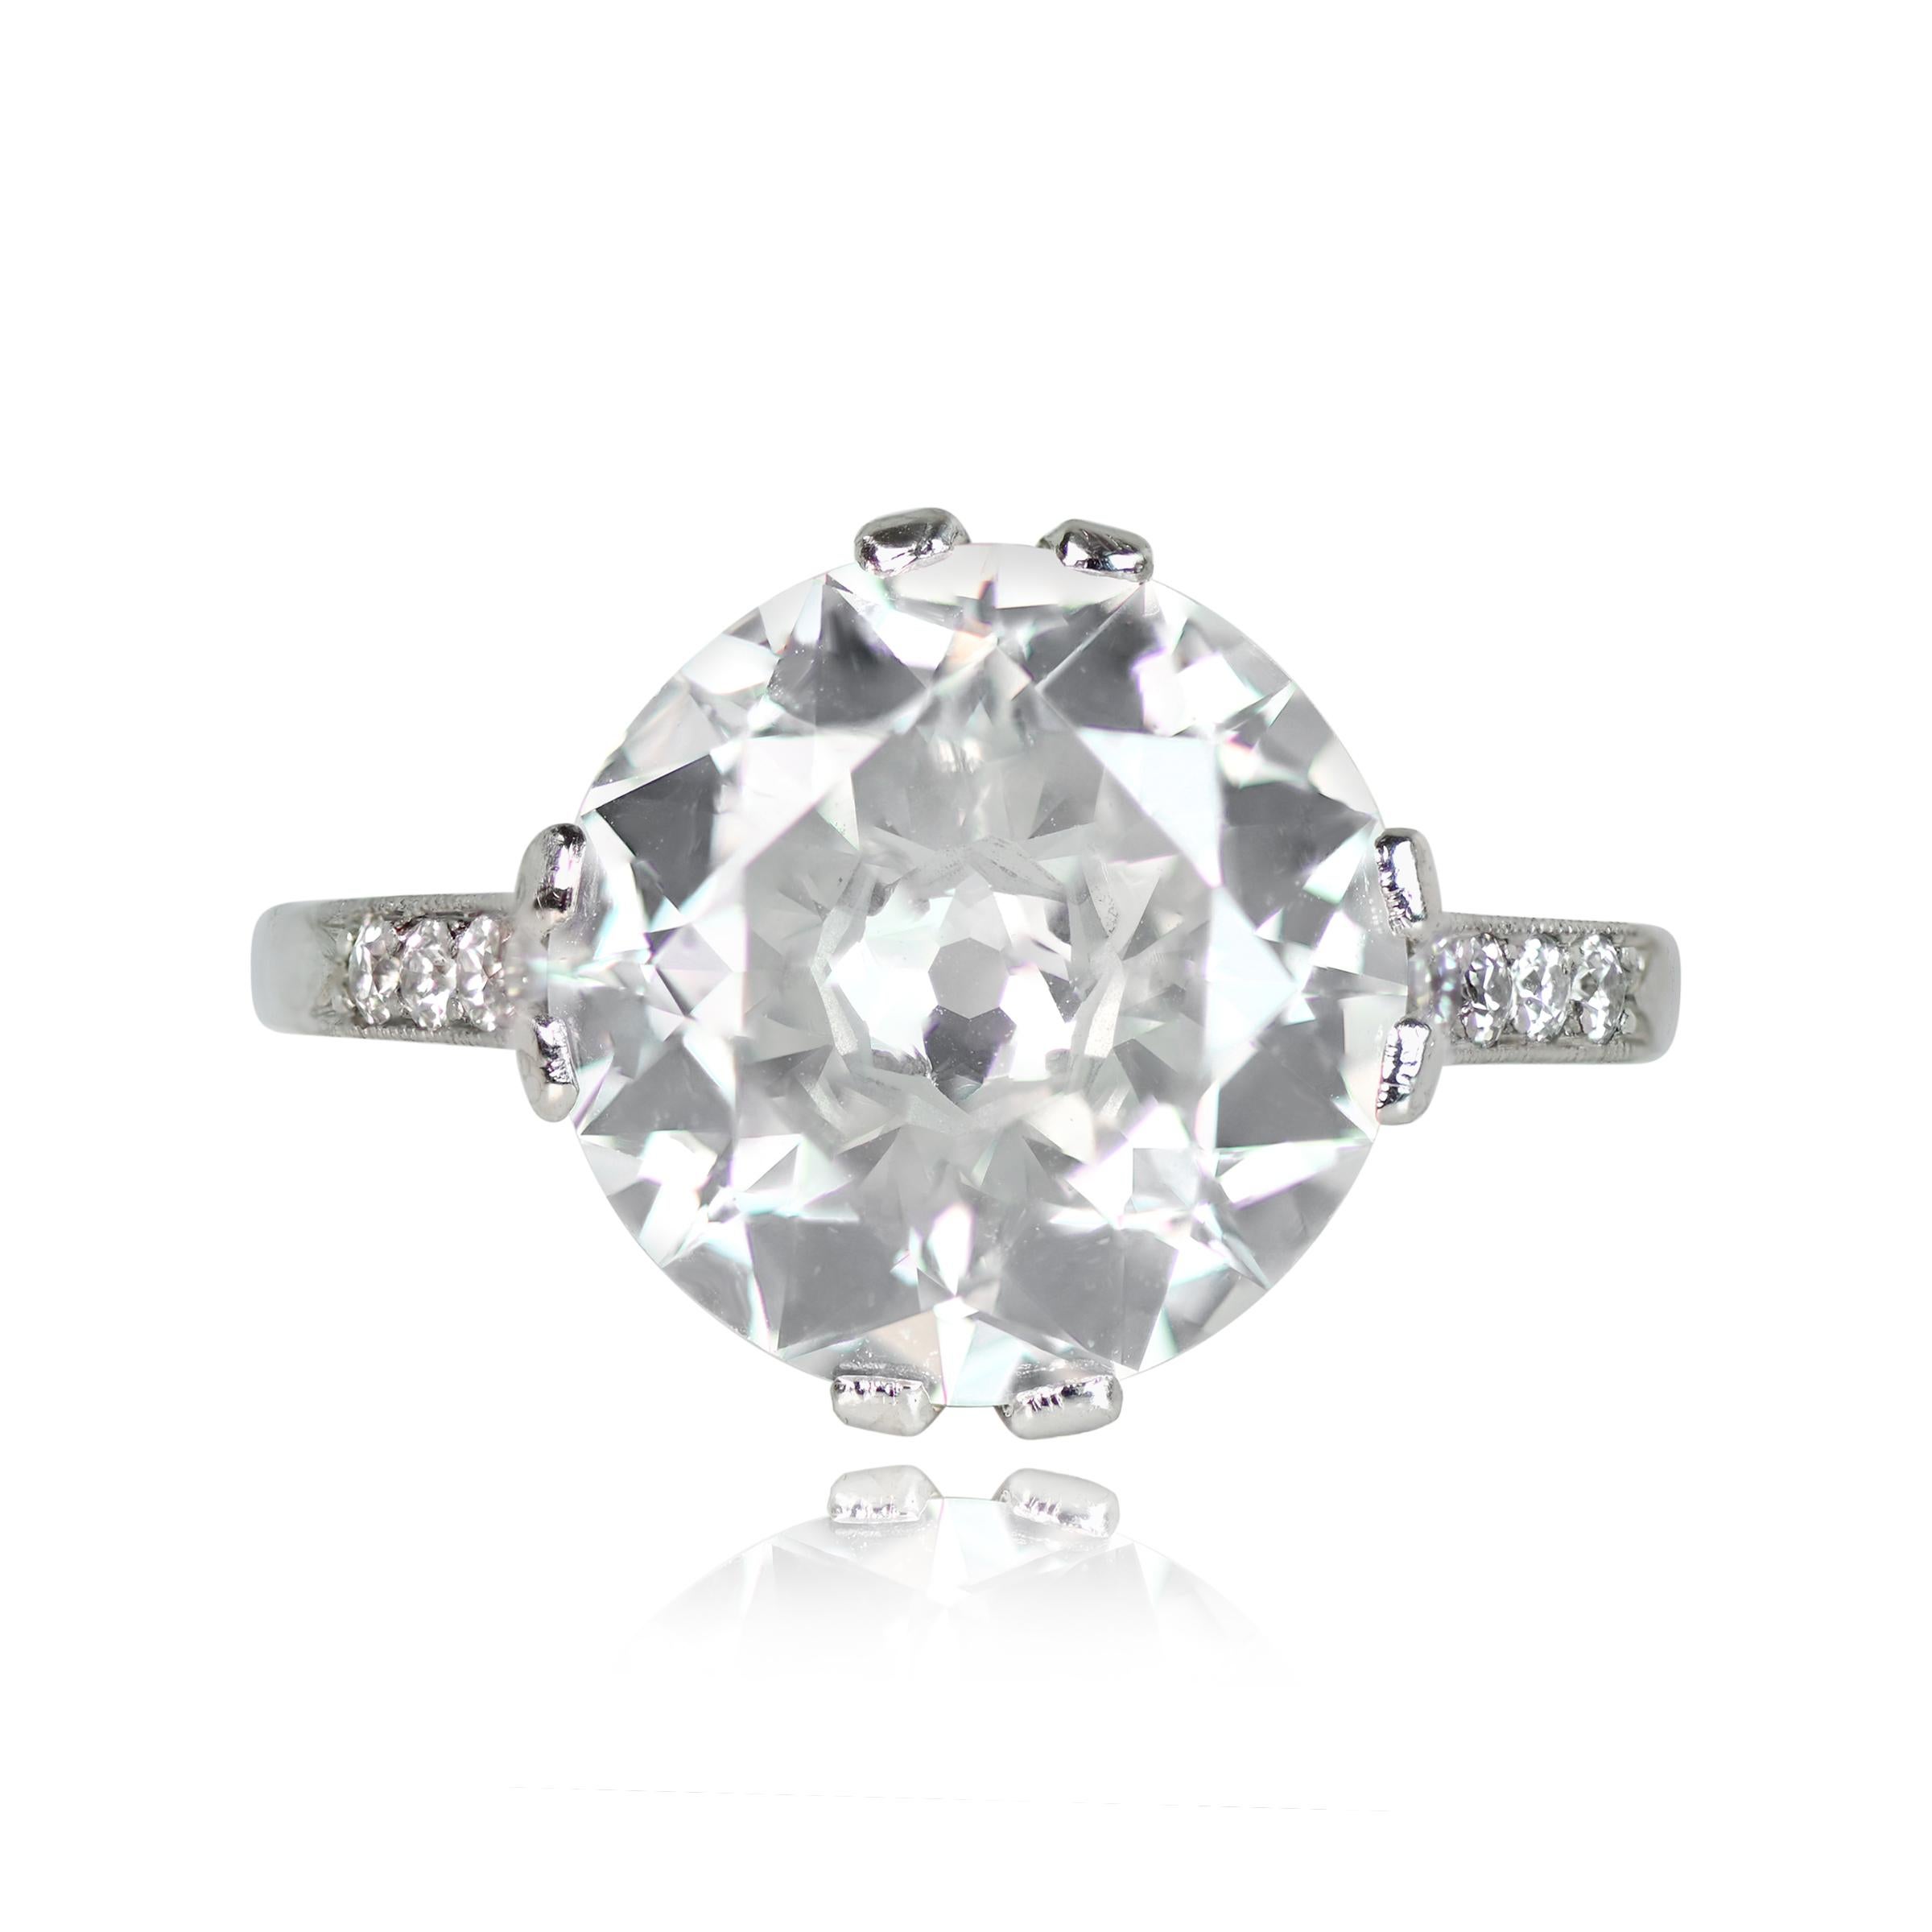 Experience pure elegance with this antique platinum solitaire ring, featuring an approximately 5.21-carat old European diamond in prong setting, with an L color grade and VS1 clarity. Smaller diamonds gracefully adorn the shoulders and